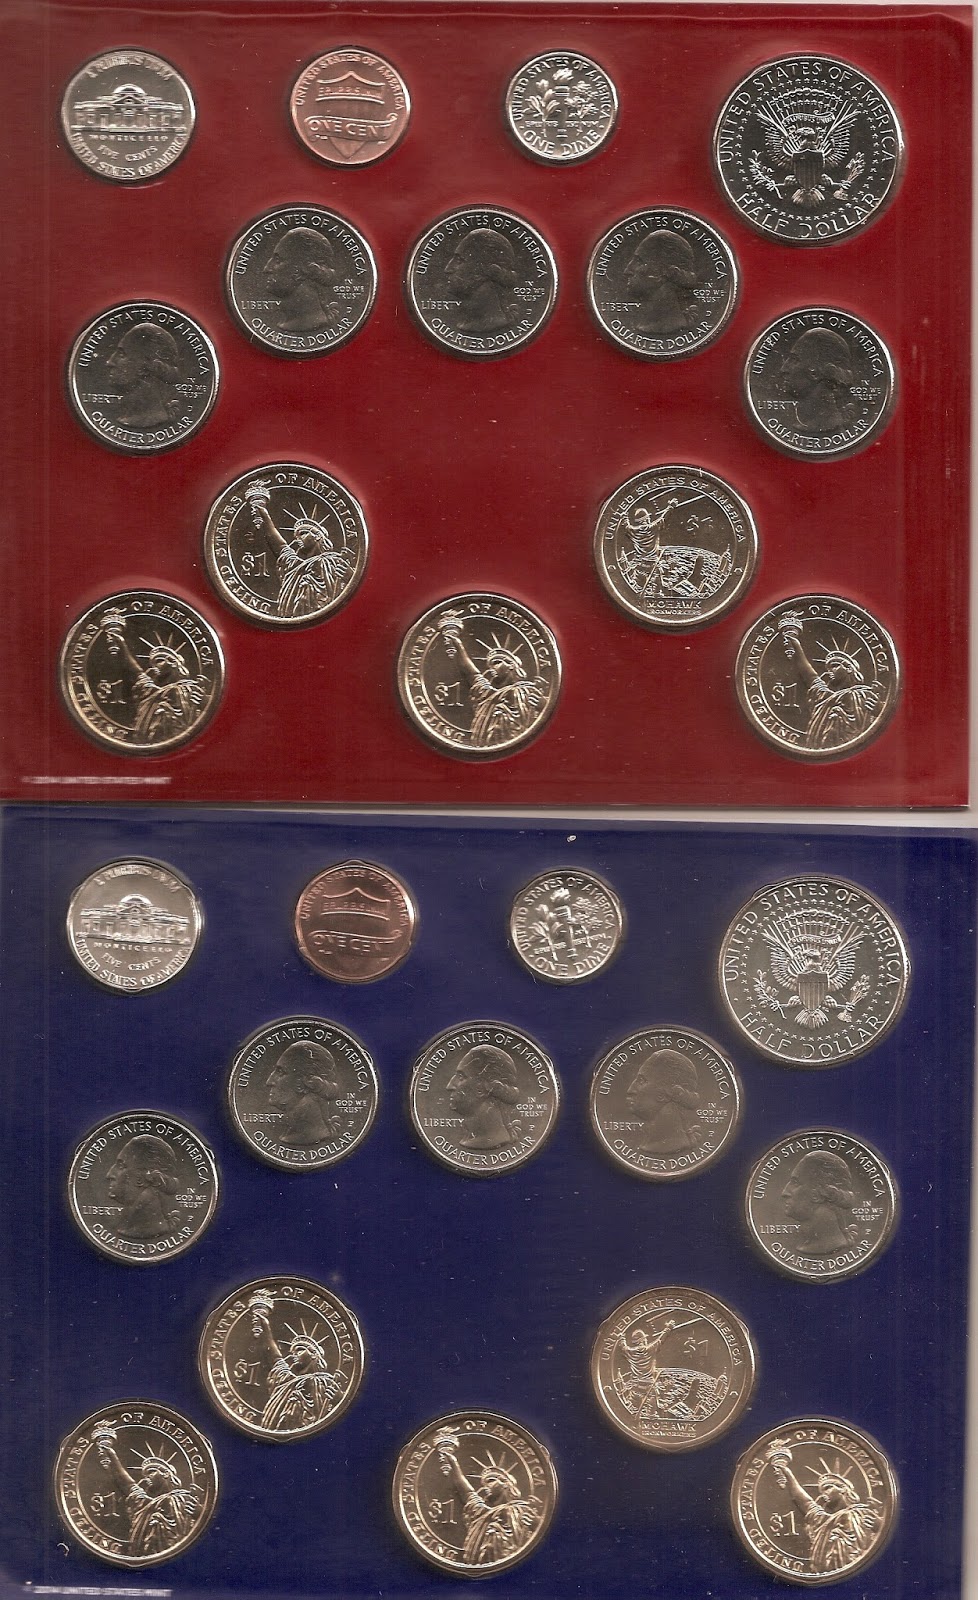 2011 U.S Mint Set 28 coins 14 each from "P" and "D" Complete and Original